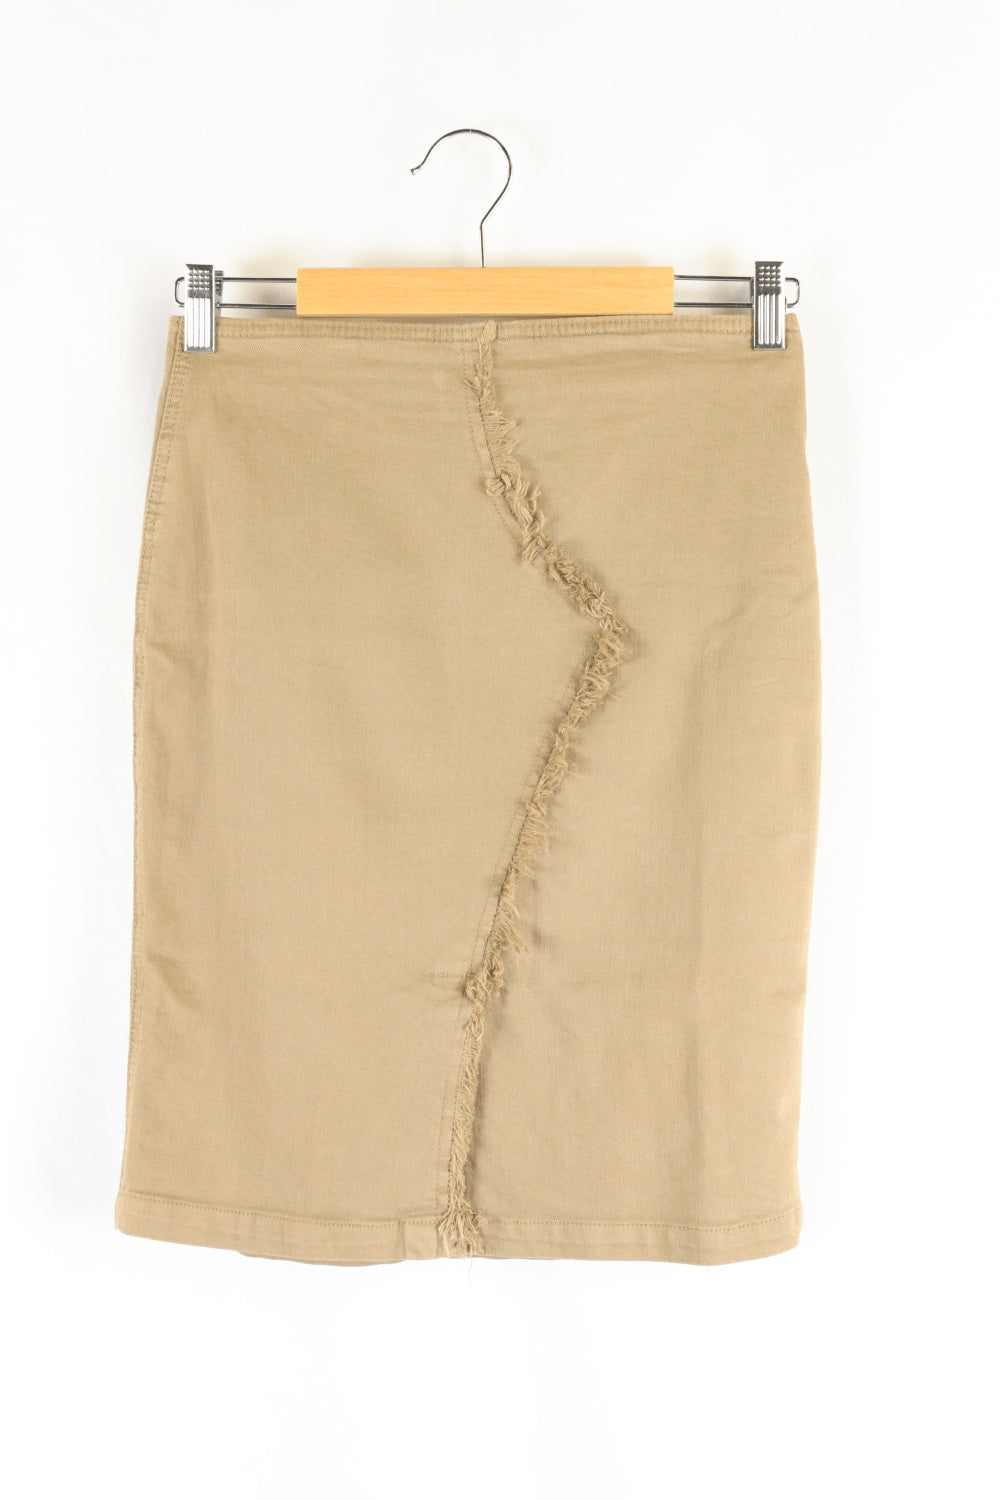 Country Road Brown Skirt 4